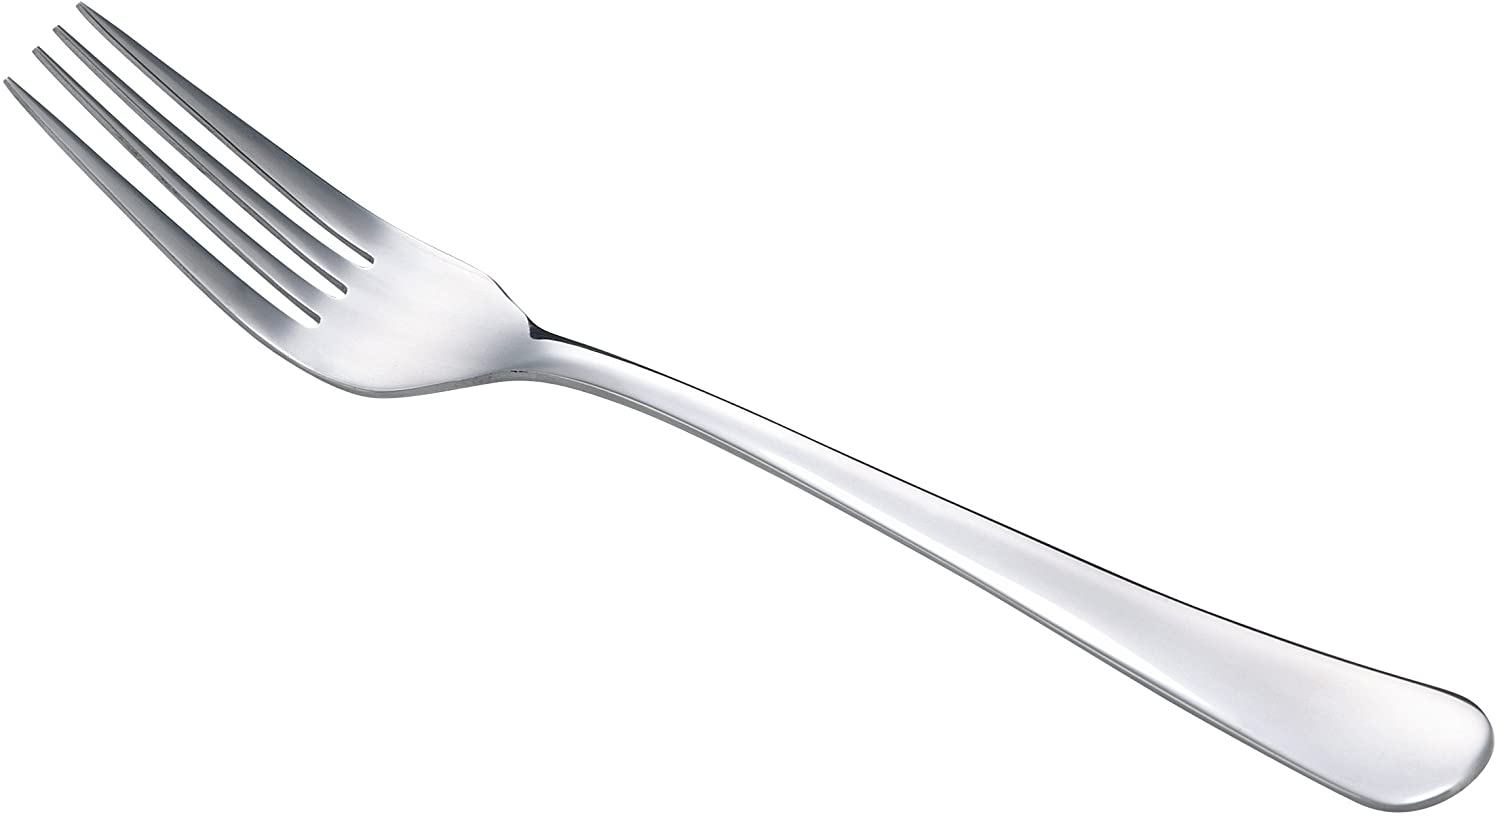 Tescoma Classic 3-Piece Table Fork